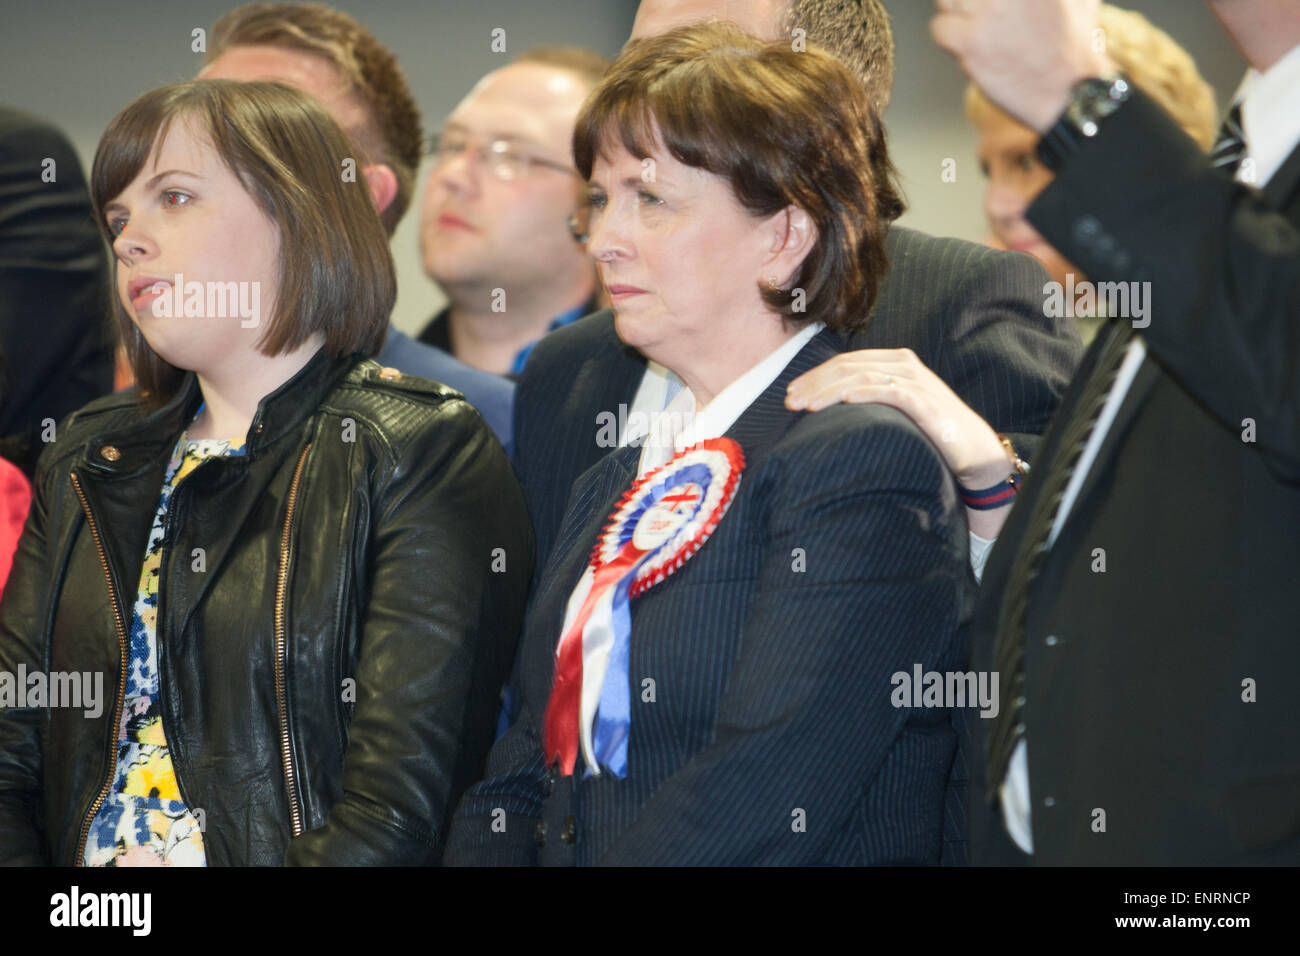 Belfast UK. 7th May 2015 General Election: Diane Dodds with daughter waiting for the the election result of the Belfast North Stock Photo